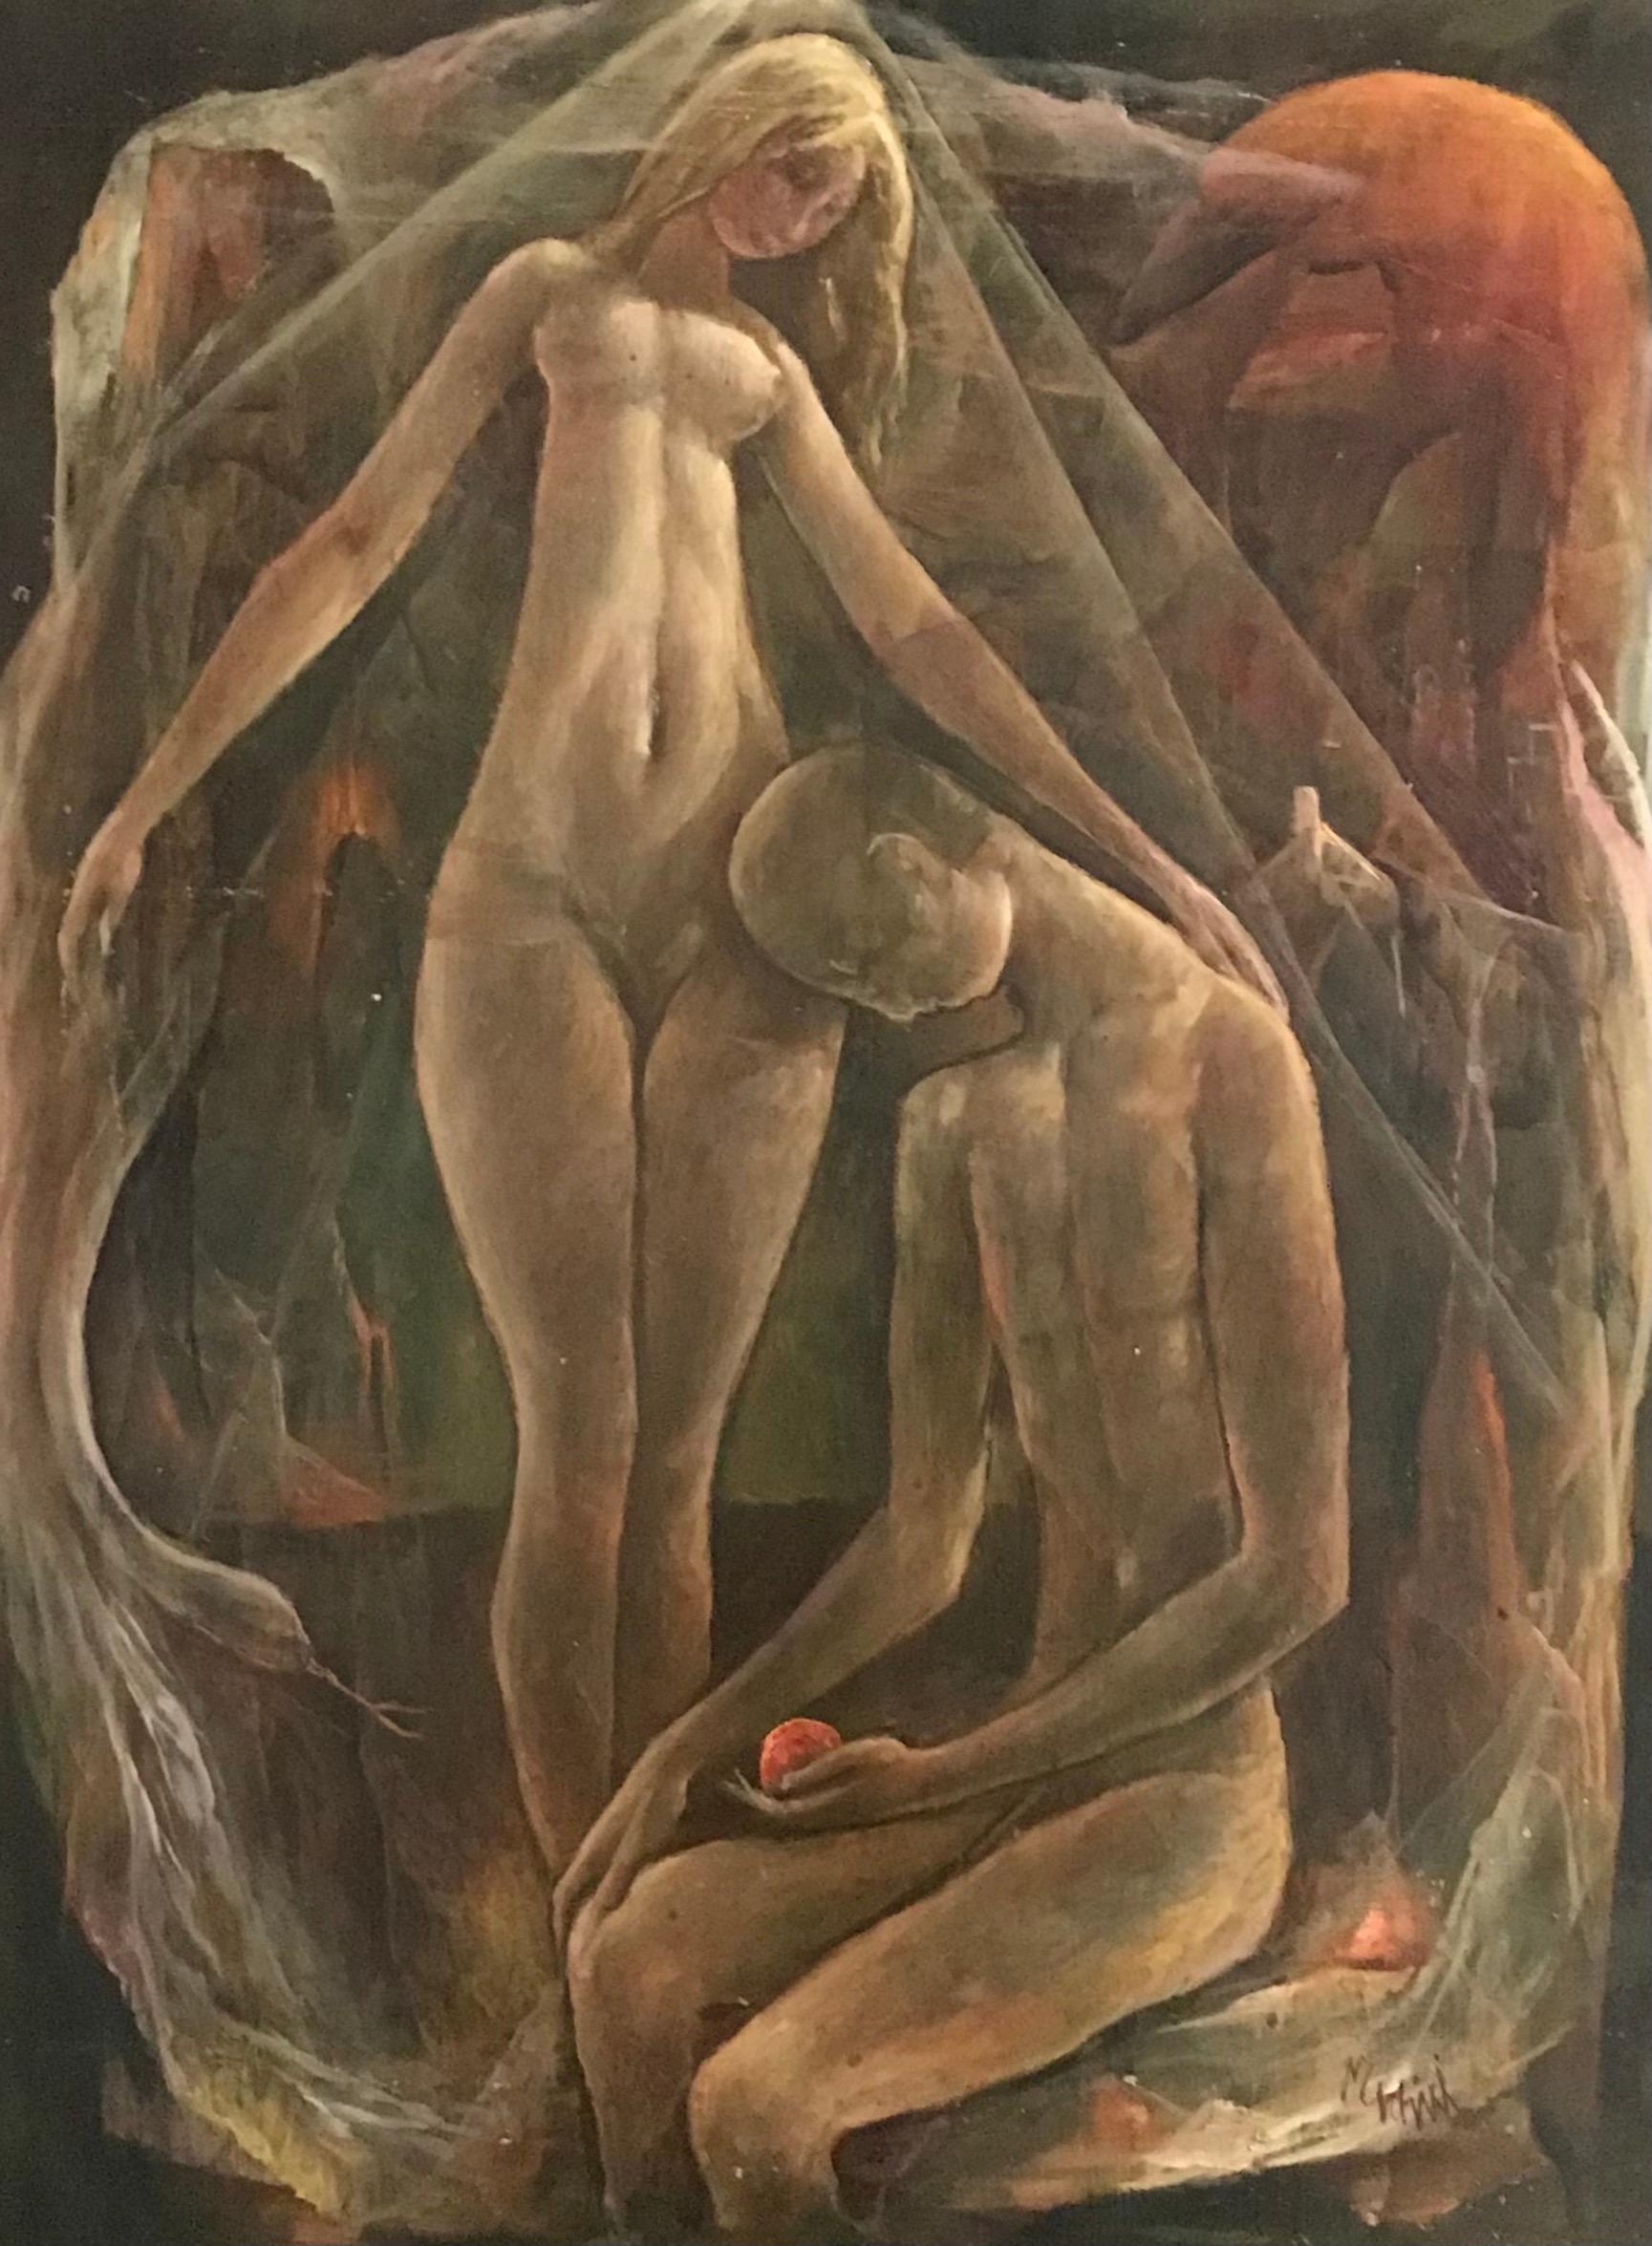 The snake and the apple by Vivaldo Martini - Oil on canvas 50x65 cm